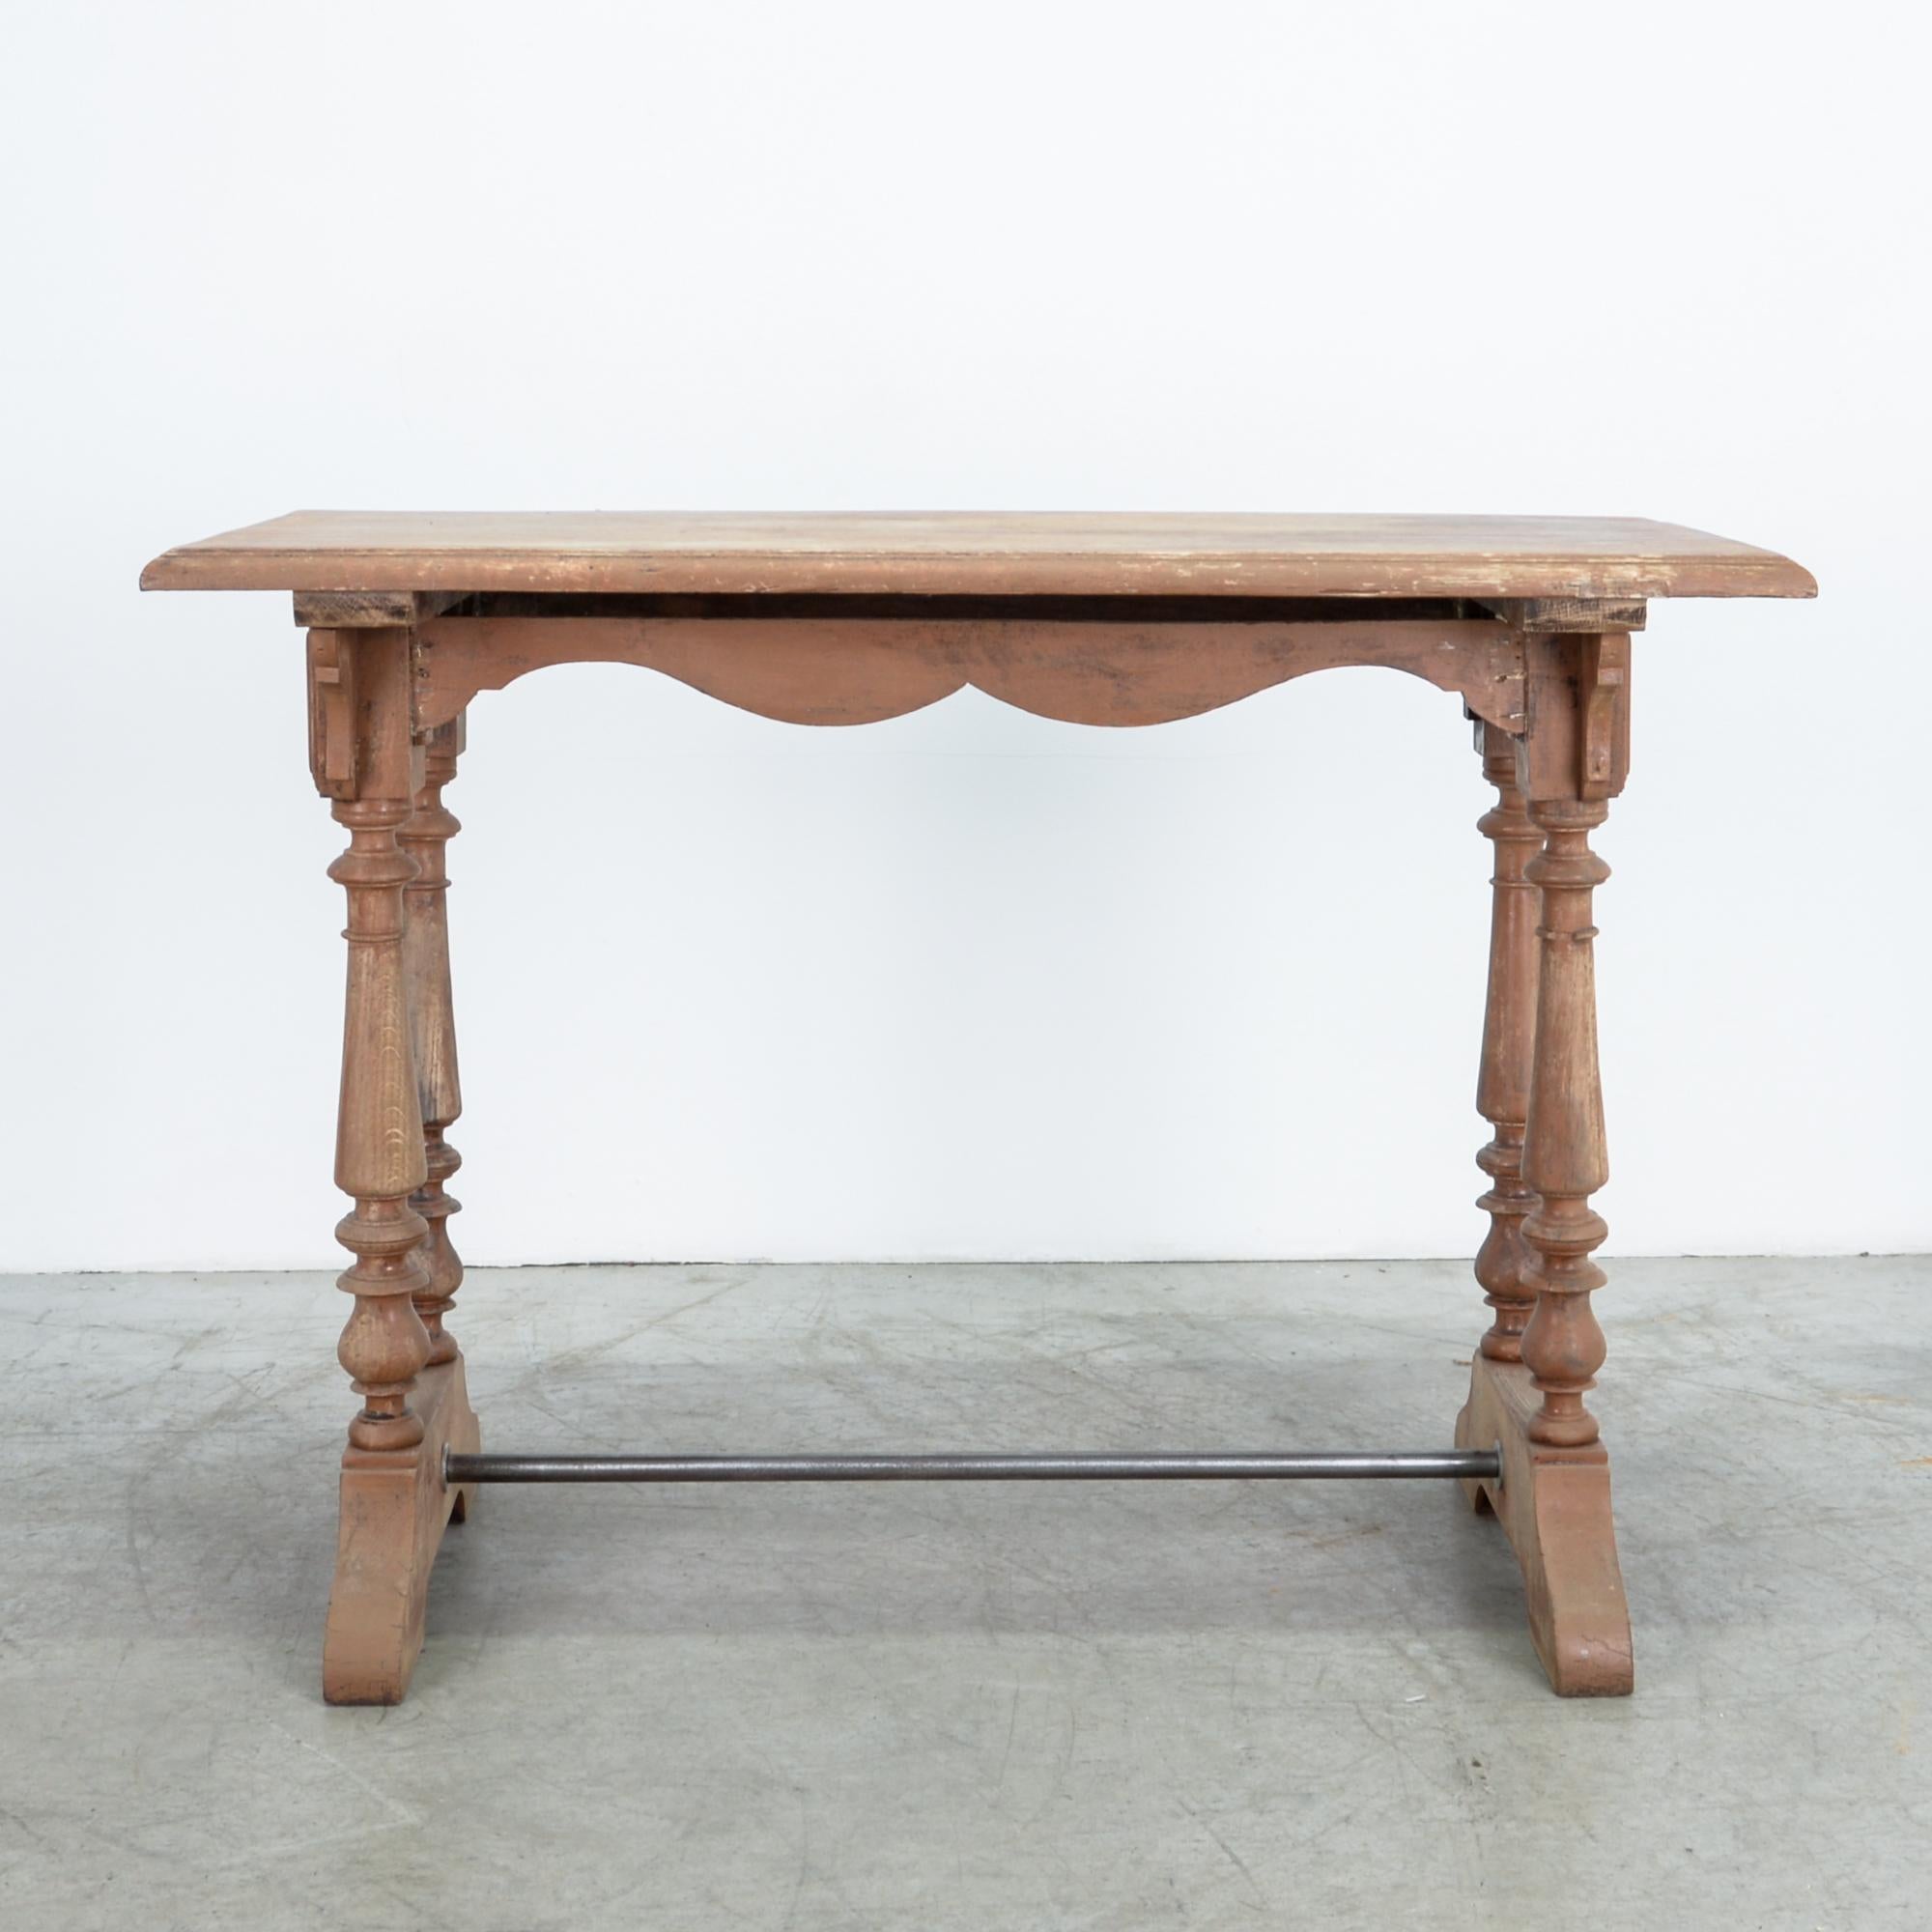 From France, circa 1900. An eclectic French street style, influenced by classical pieces and the necessities of the cafe. A typical design with two sturdy wooden legs, a scalloped wooden brace, and a metal bar suspended below. Handsome patina and